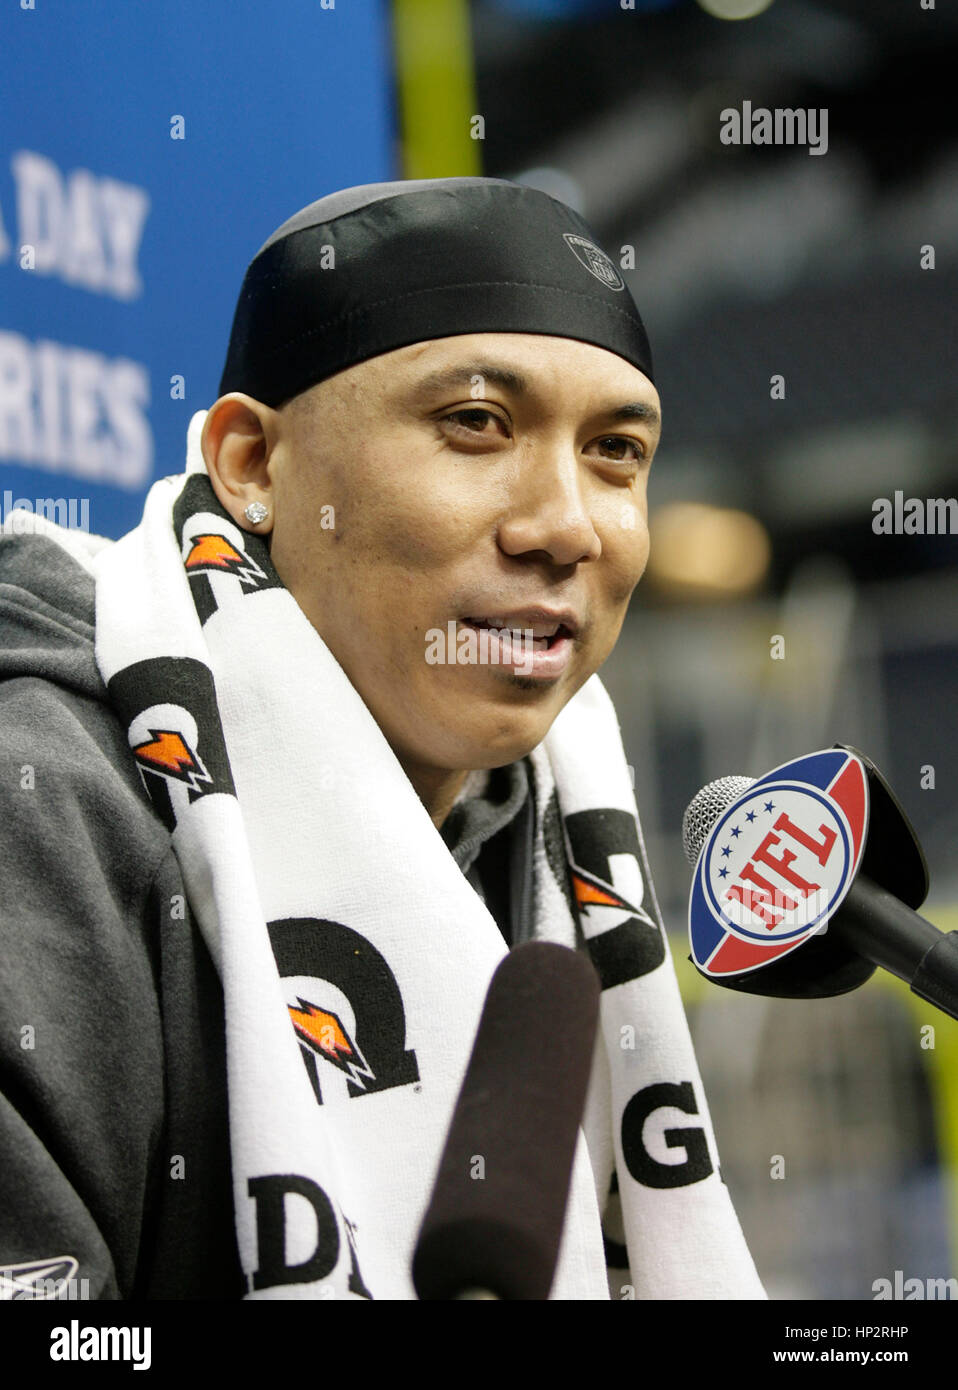 Pittsburgh Steelers Hines Ward at Super Bowl Media Day in Cowboys Stadium on February 1, 2011 in Arlinton, Texas. Photo by Francis Specker Stock Photo